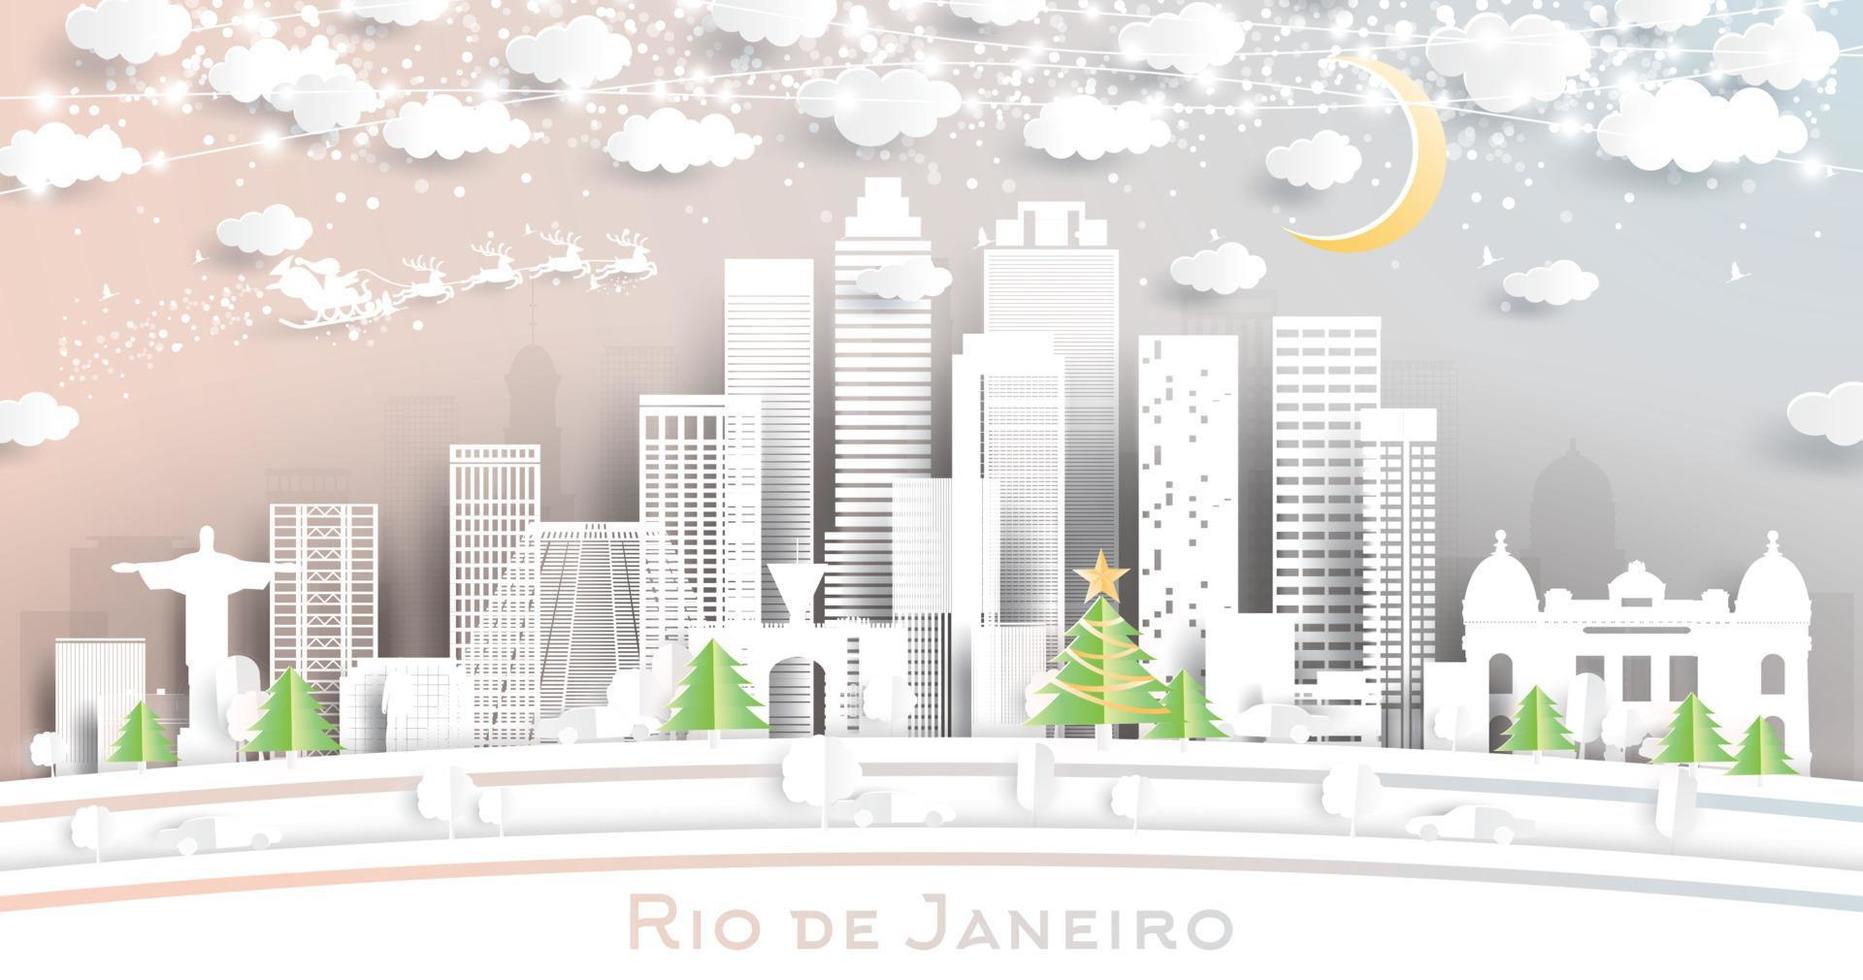 Rio de Janeiro Brazil City Skyline in Paper Cut Style with Snowflakes, Moon and Neon Garland. vector